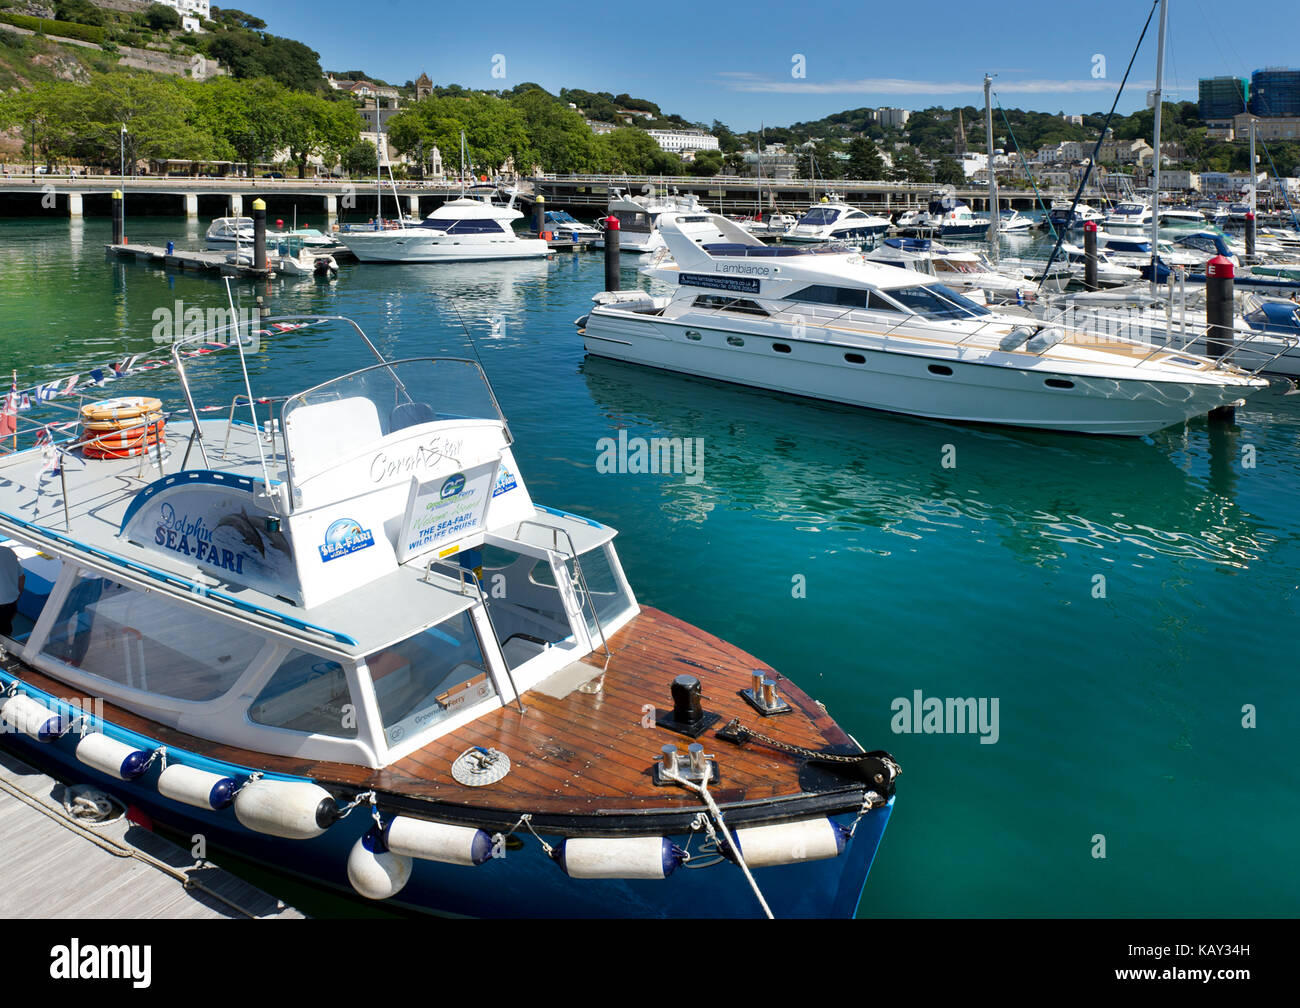 Pleasure boat offering Sea Safaris moored at Princess Pier in the Harbour at Torquay, Devon, UK on a sunny day. Seafood Coast, English Riviera Stock Photo